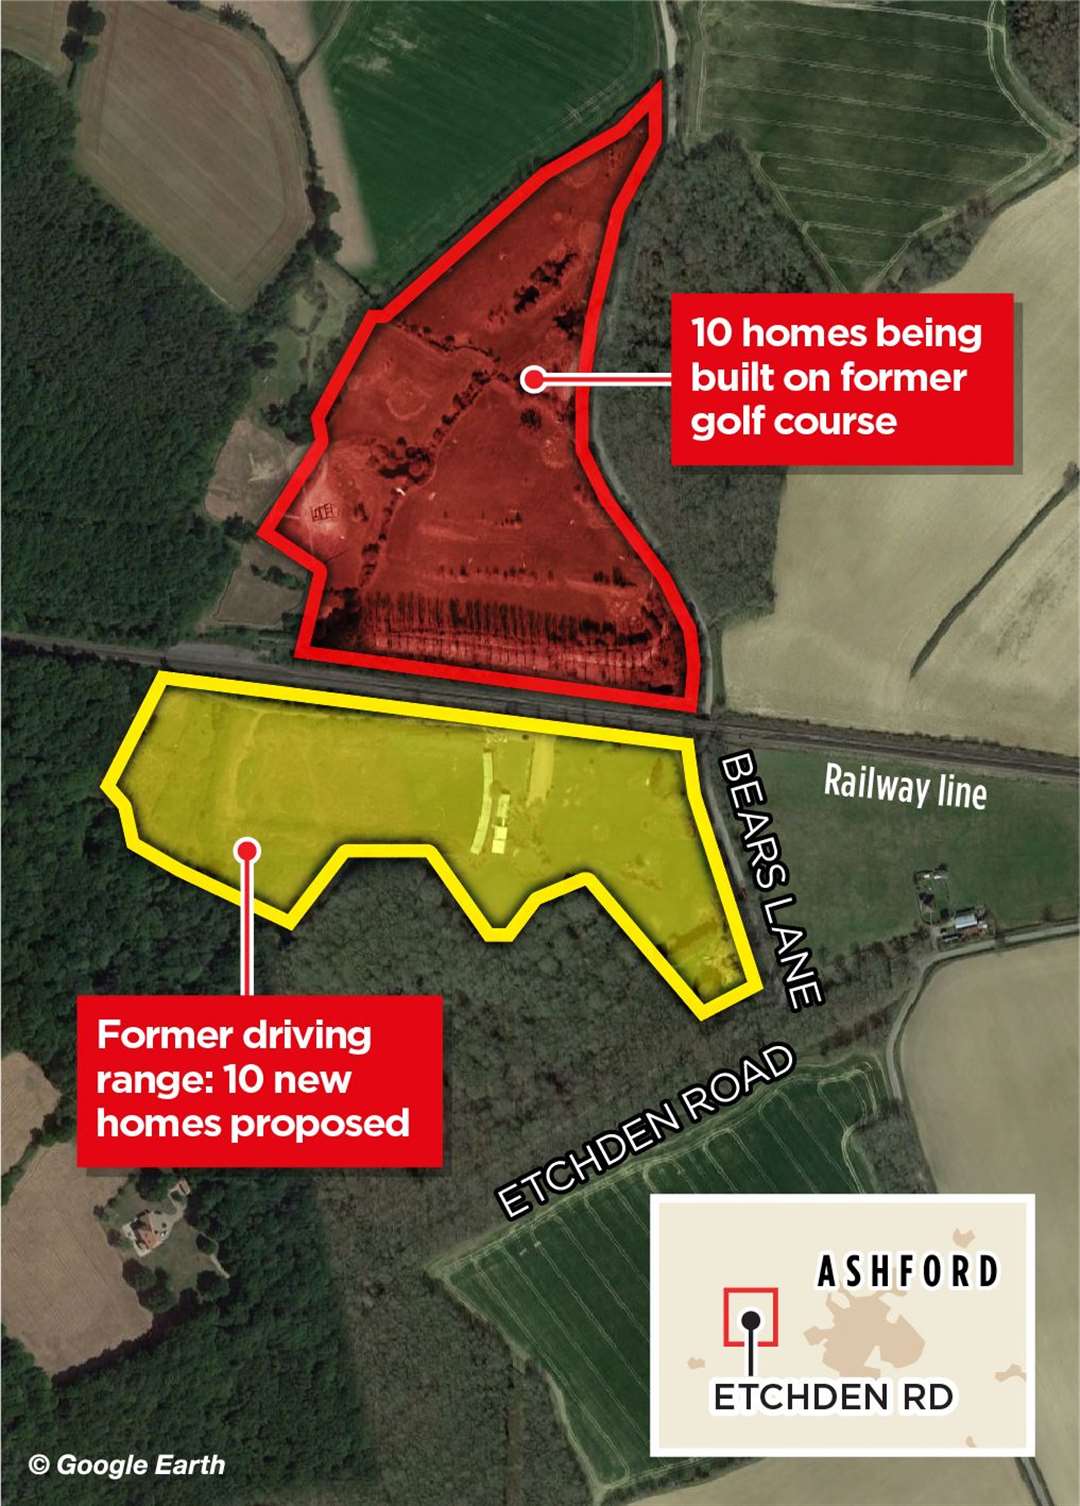 Homes are planned on the former driving range at the Great Chart Golf and Leisure complex